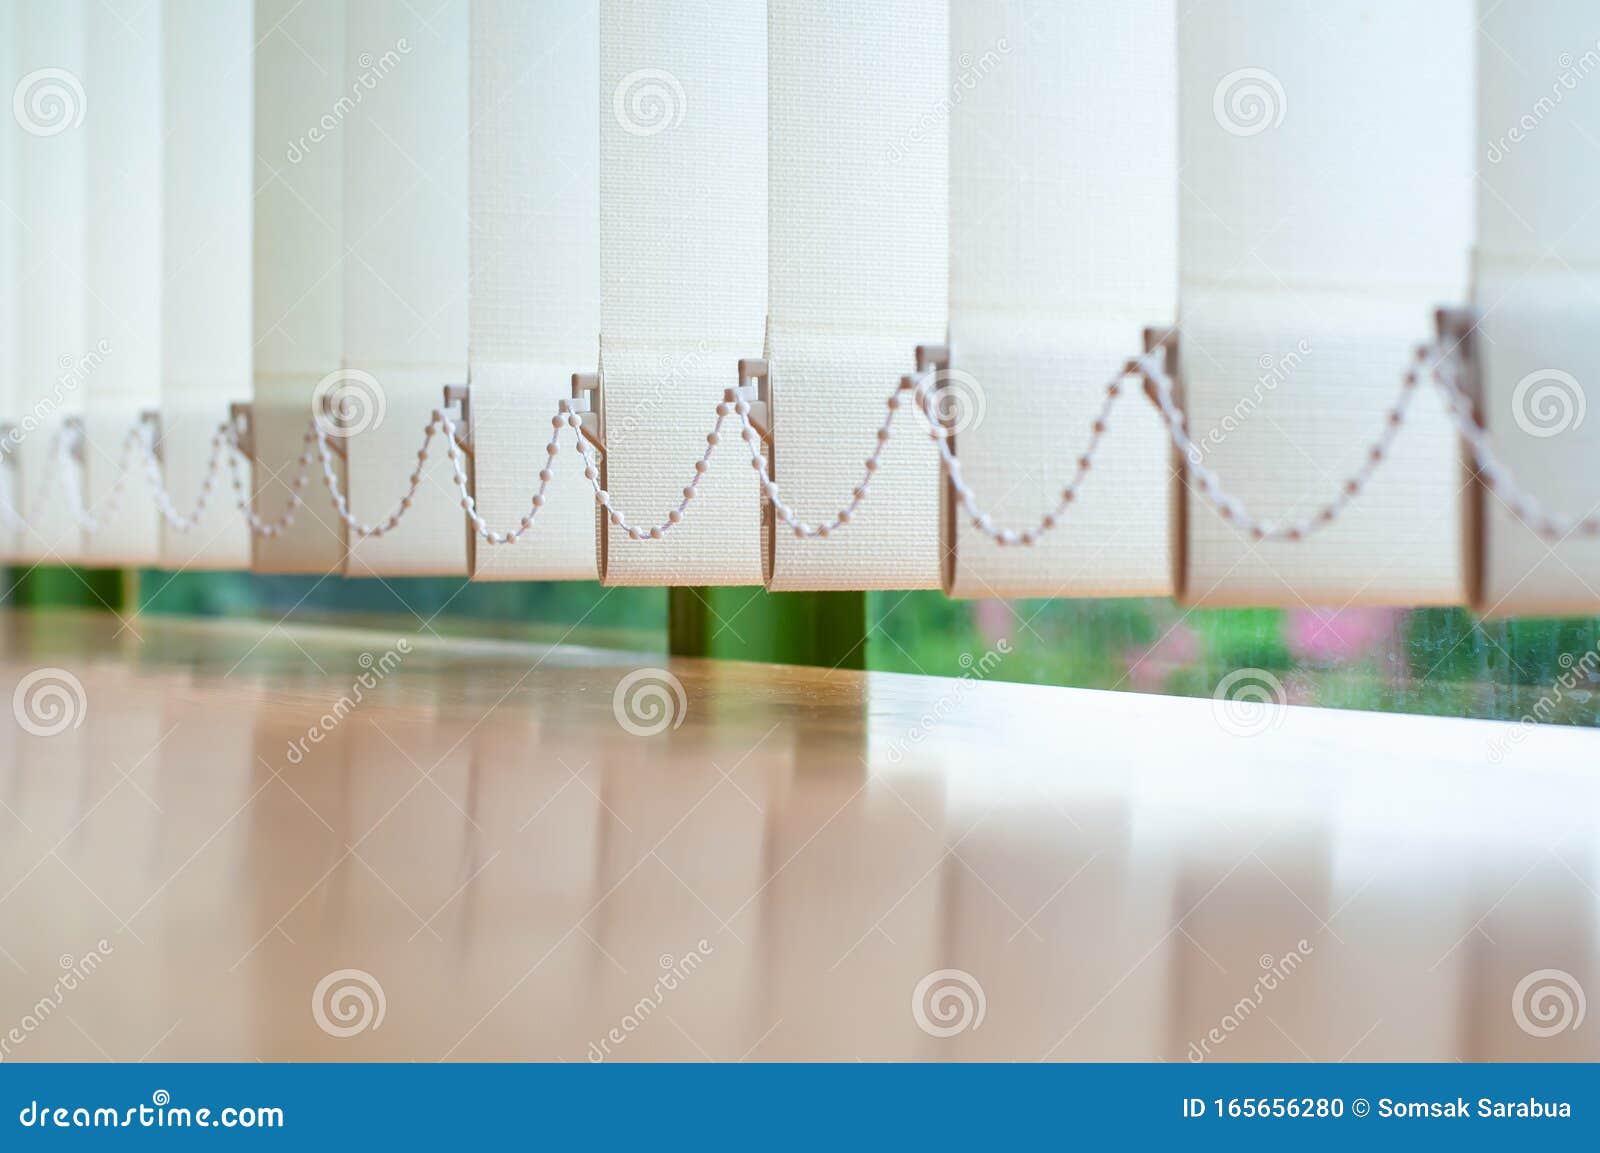 Vertical Blind For The Office Room Decoration Stock Photo Image Of Pattern Curtain 165656280